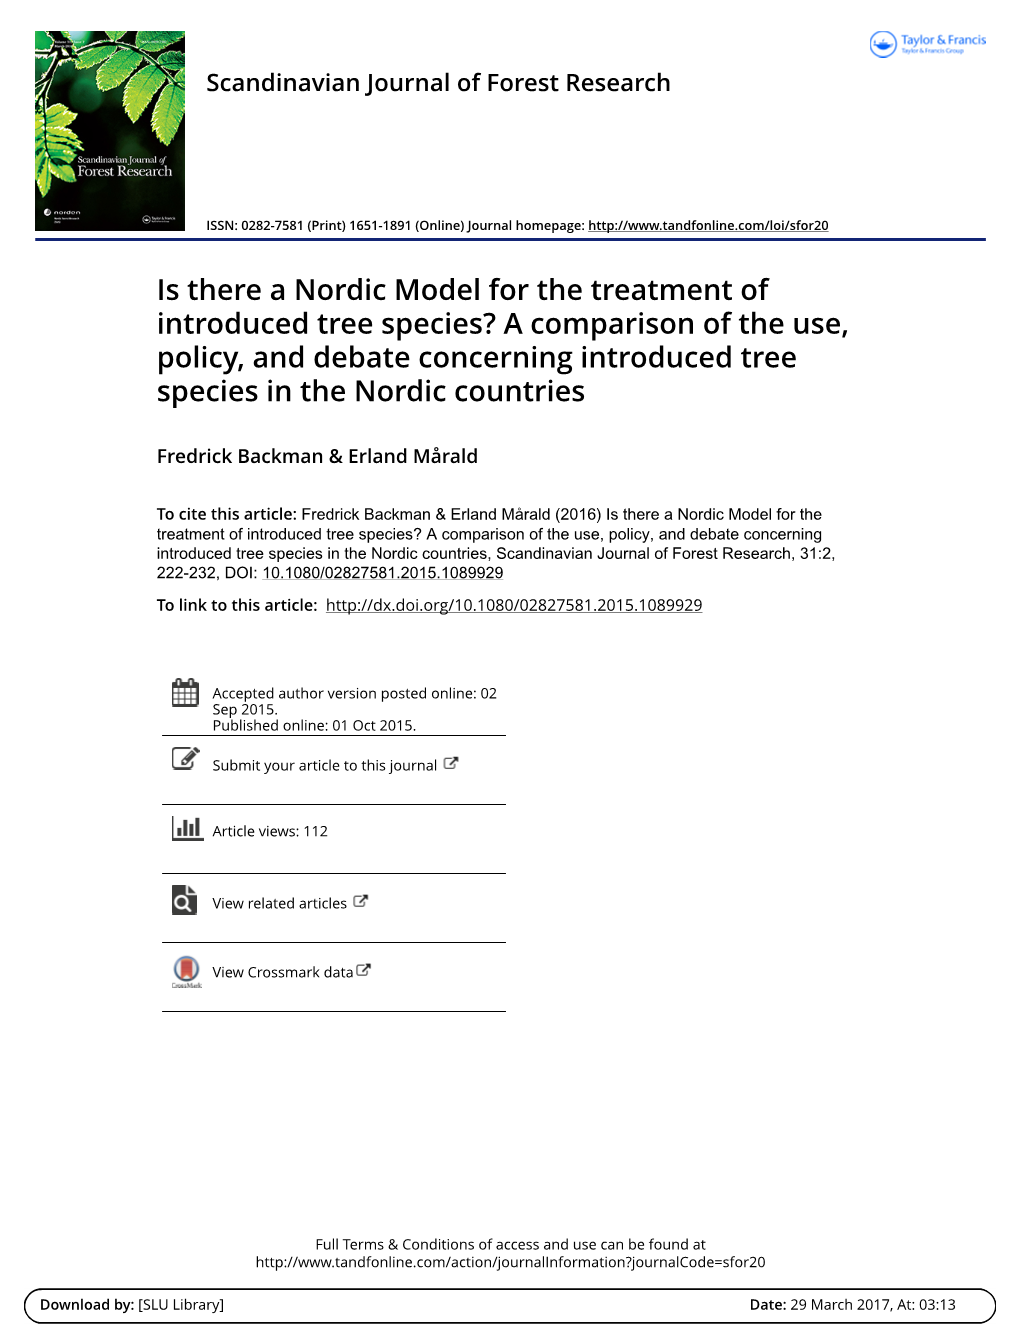 Is There a Nordic Model for the Treatment of Introduced Tree Species